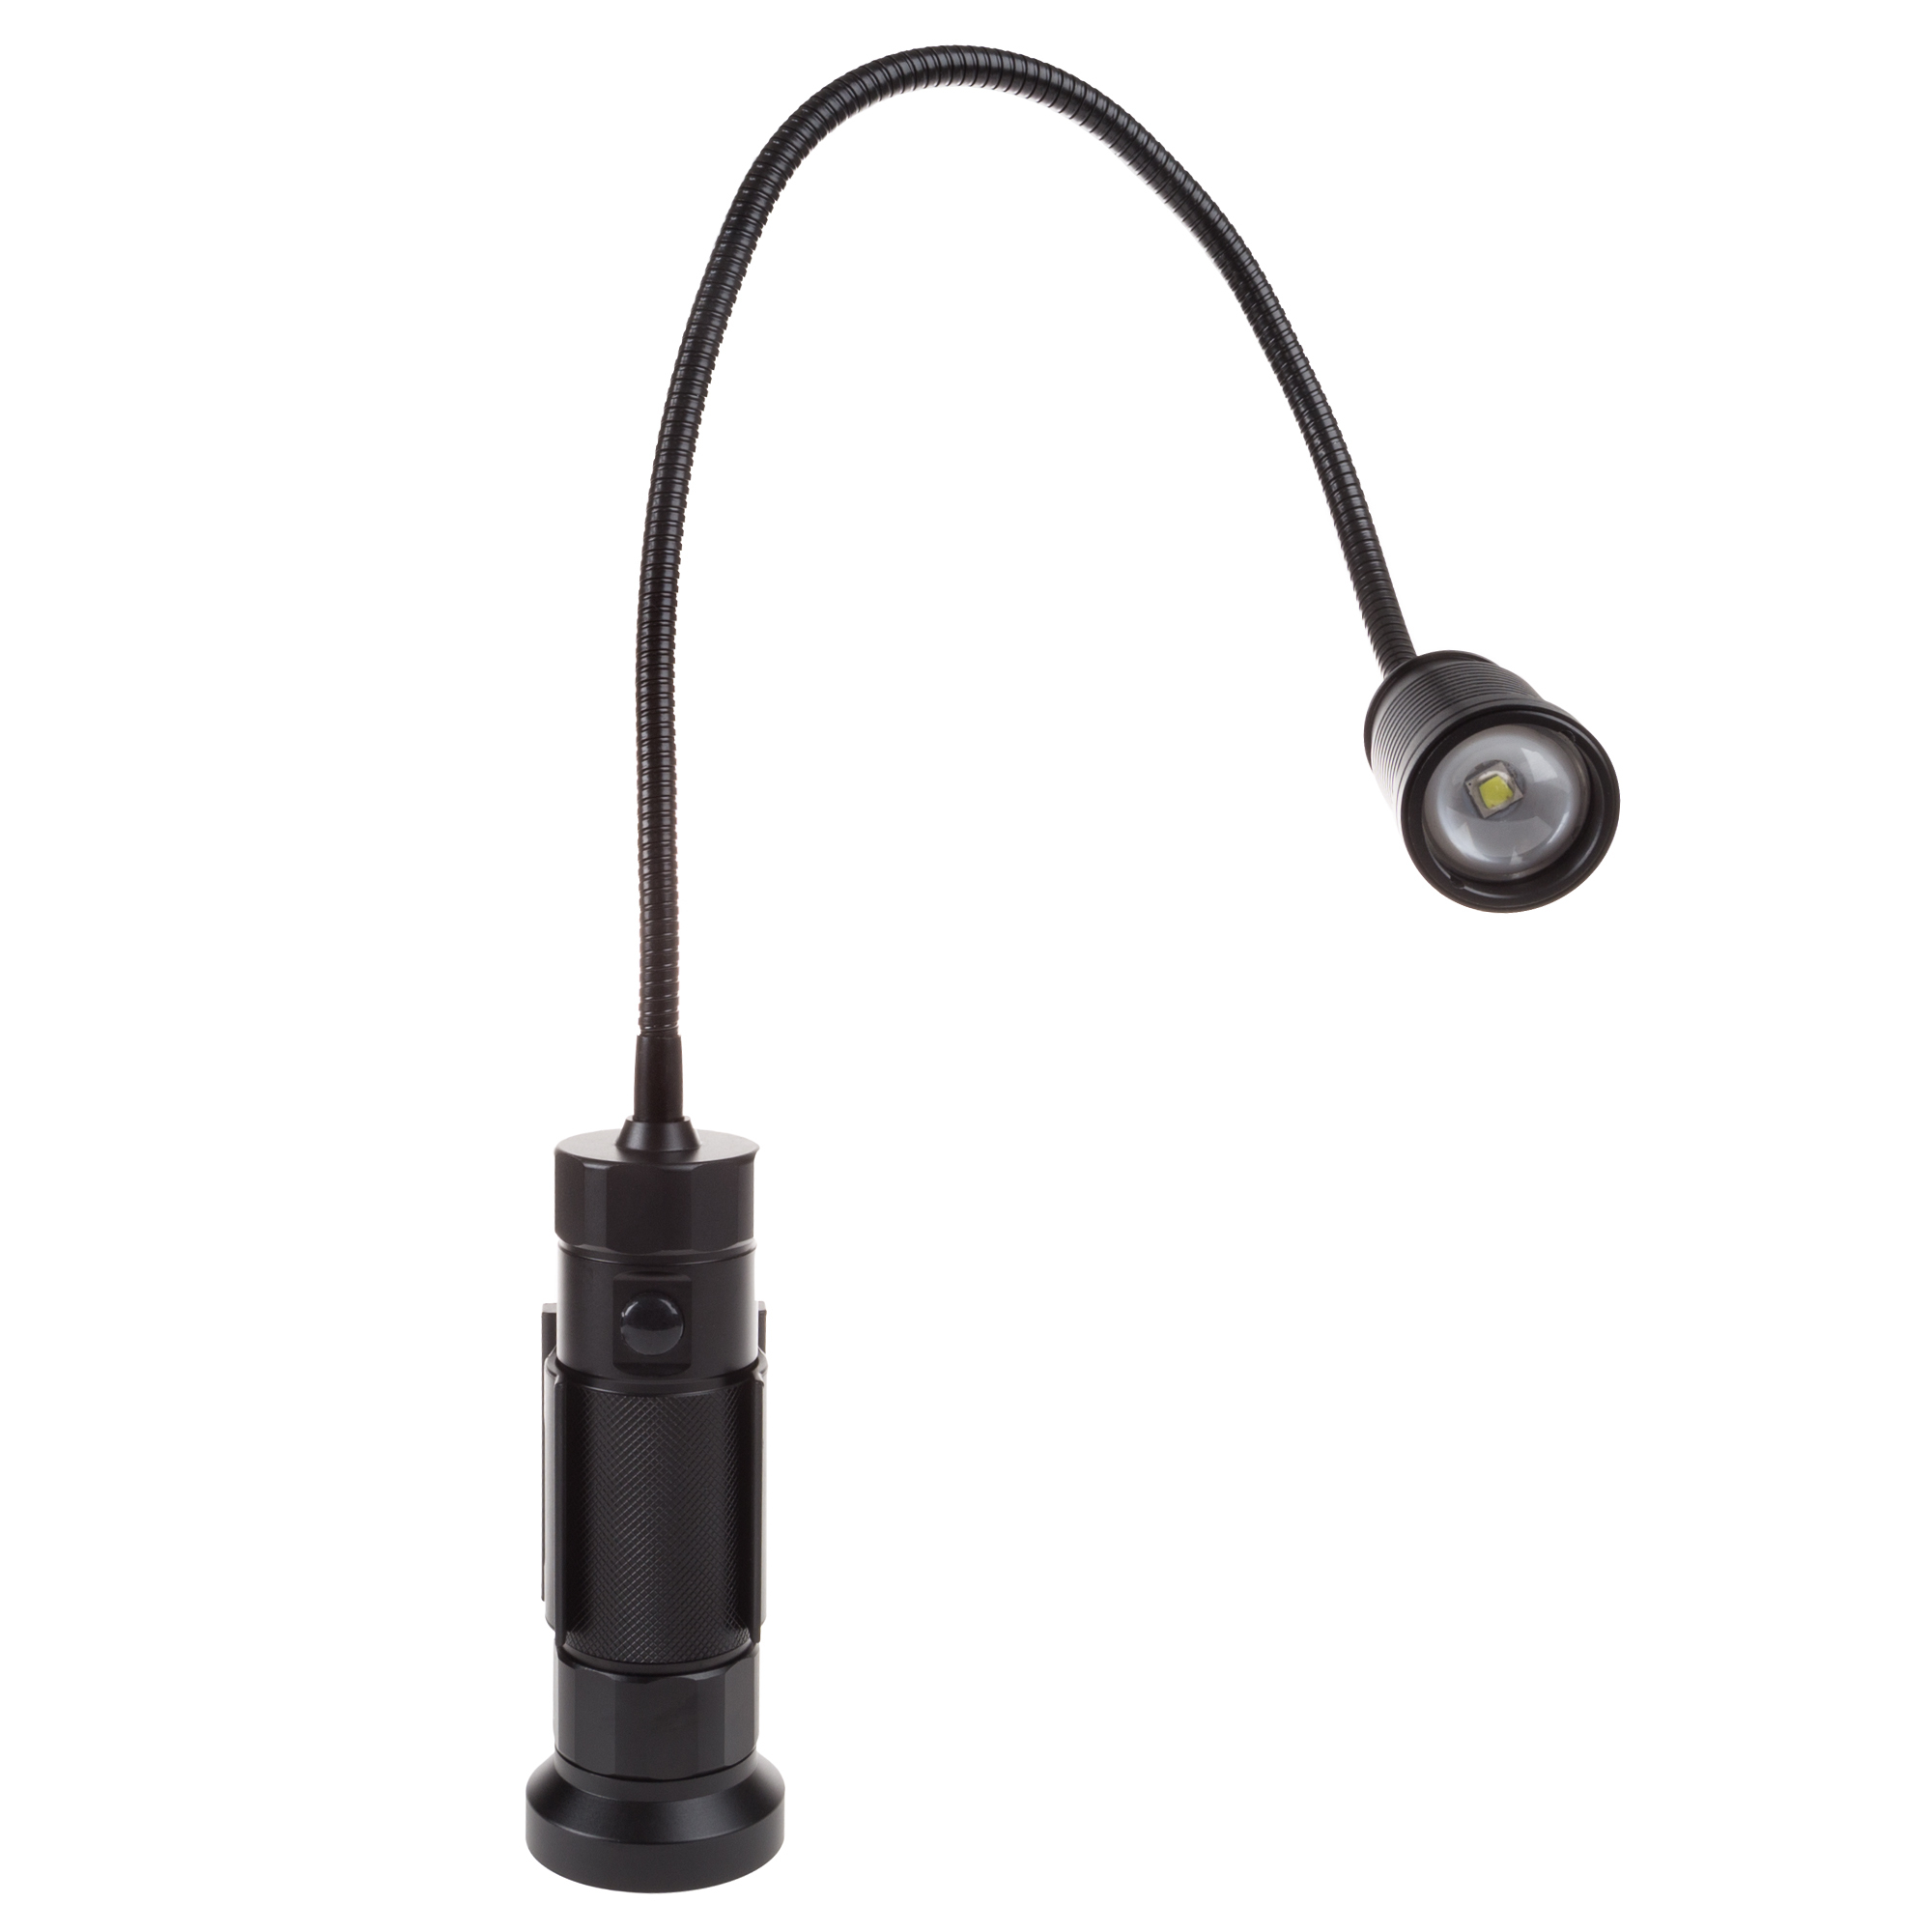 Bright Magnetic Worklight 550 Lumens Flexible Gooseneck Battery Operated Cree LED Light 3 AA